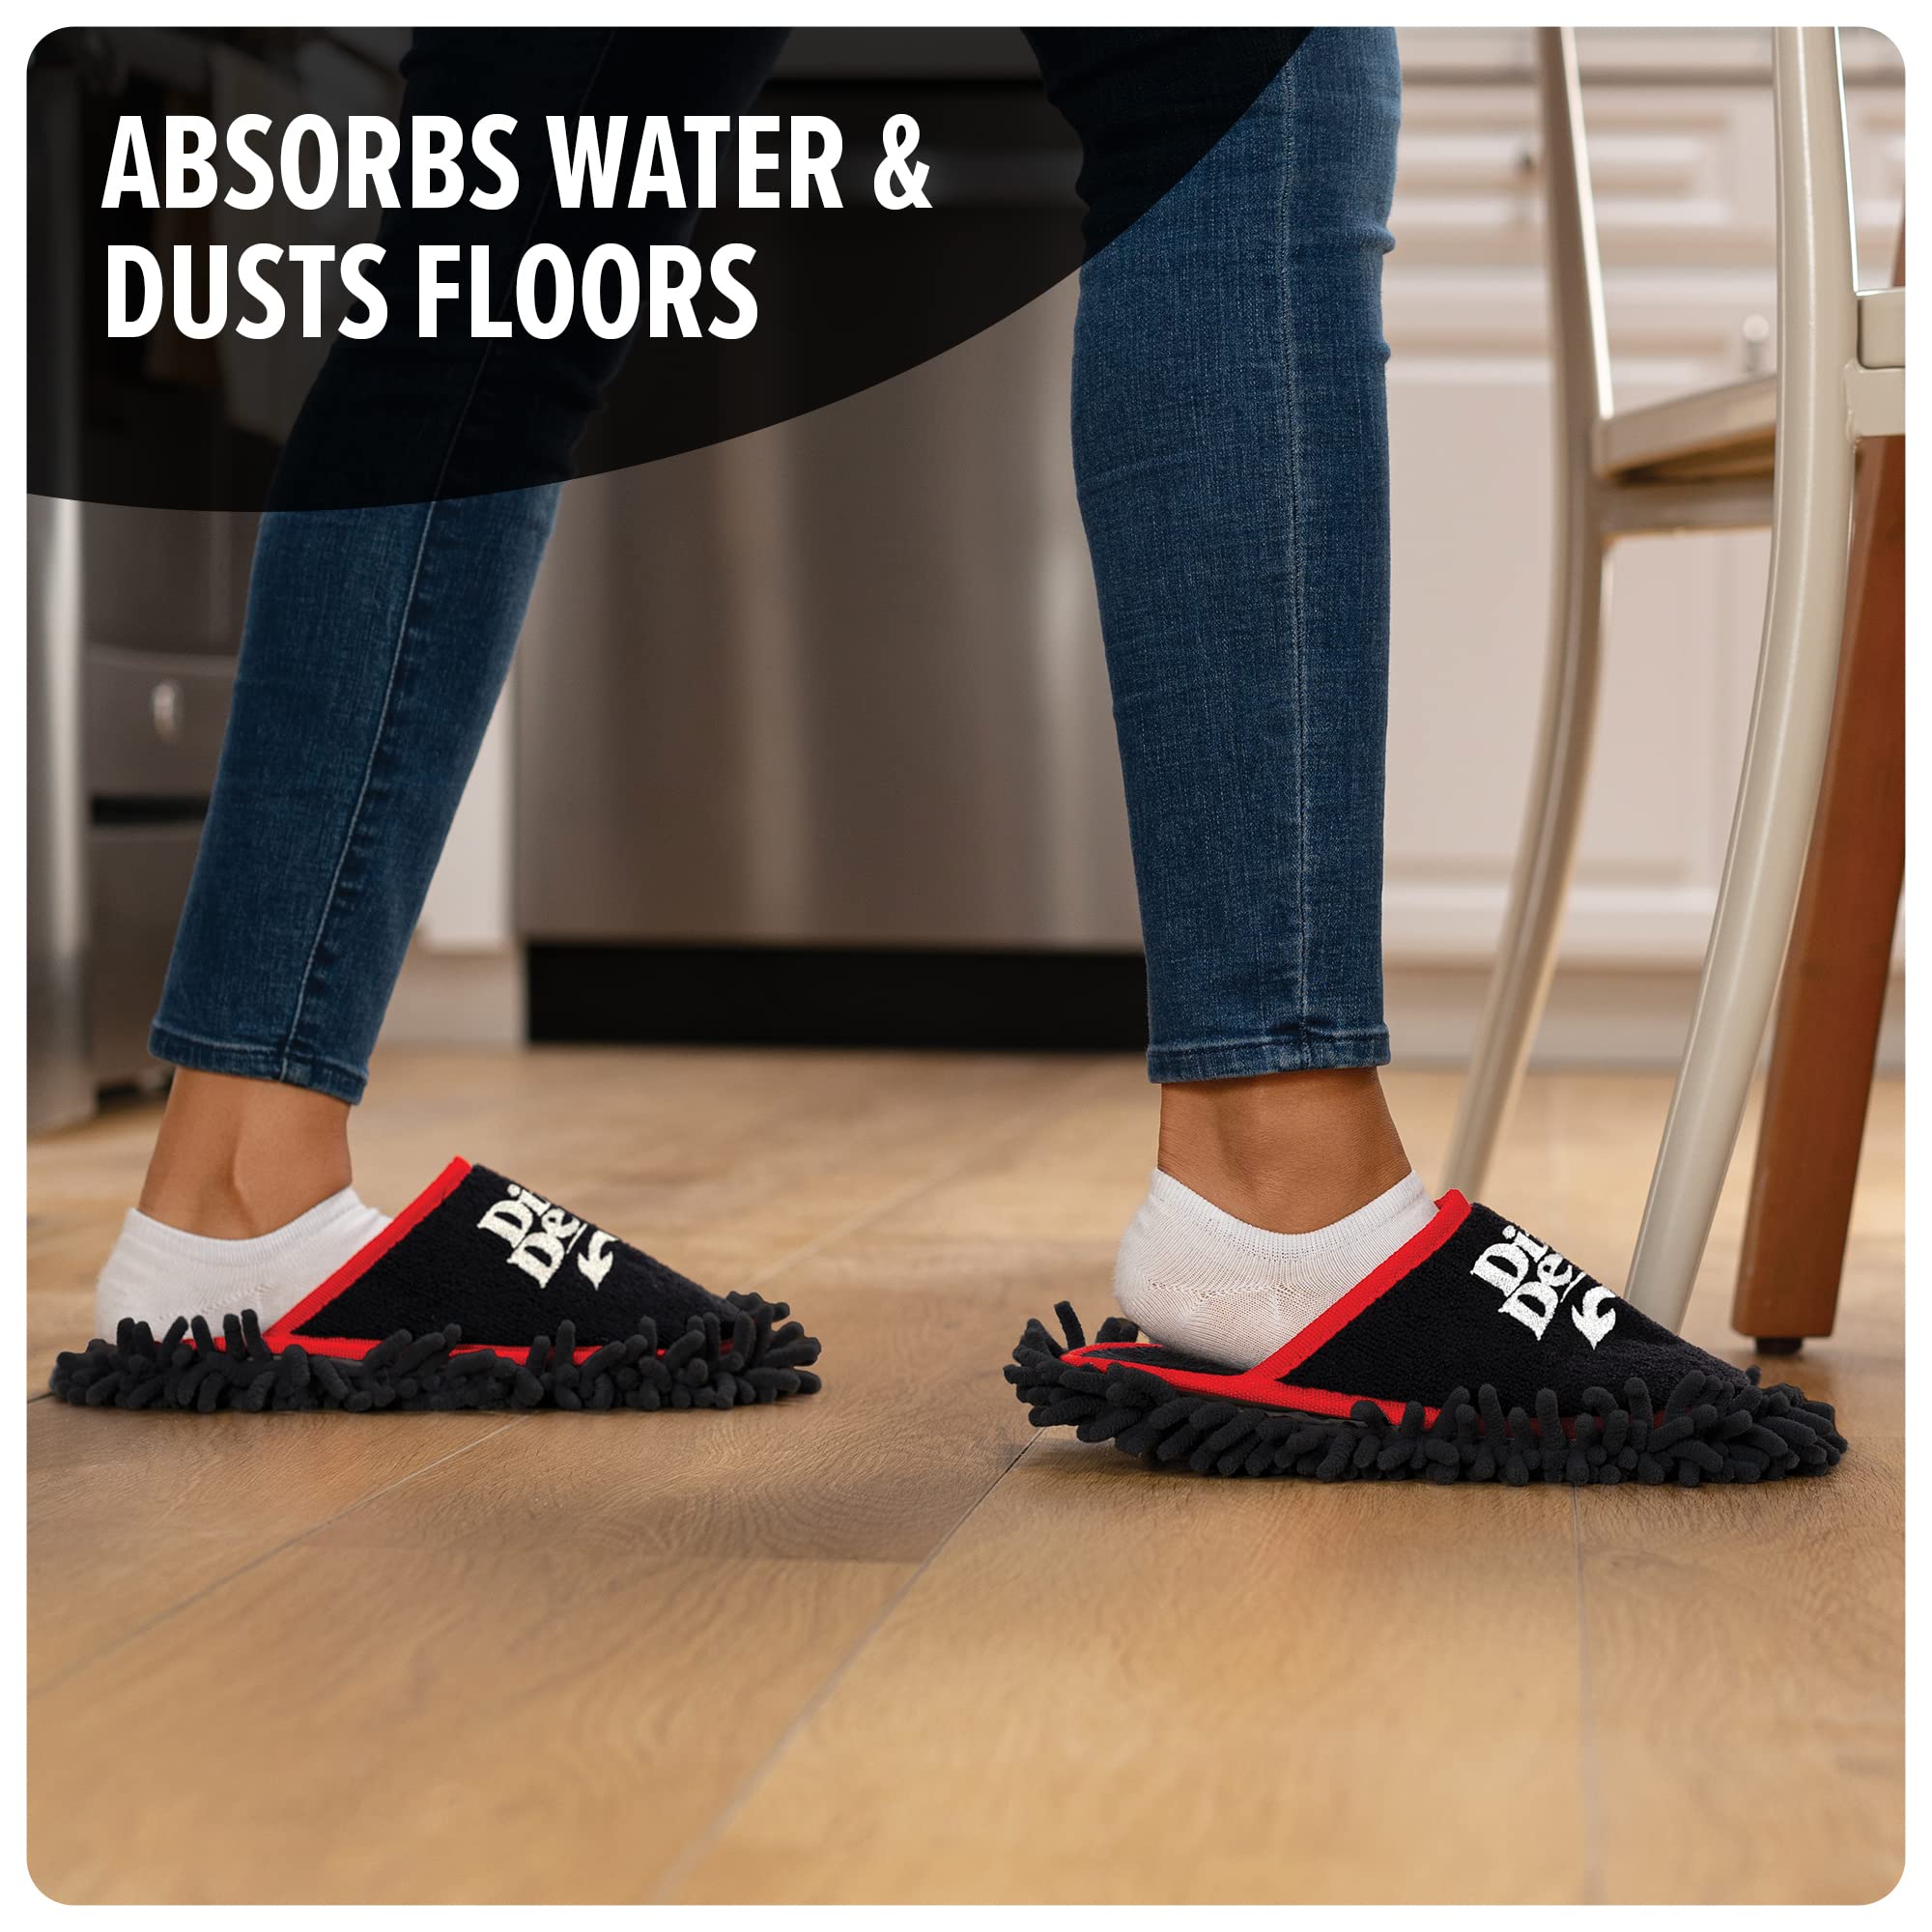 Dirt Devil Cleaning Slippers, Microfiber Washable Dusting Shoes, for Floor, Hair, House and Baseboards, MD95000, Black